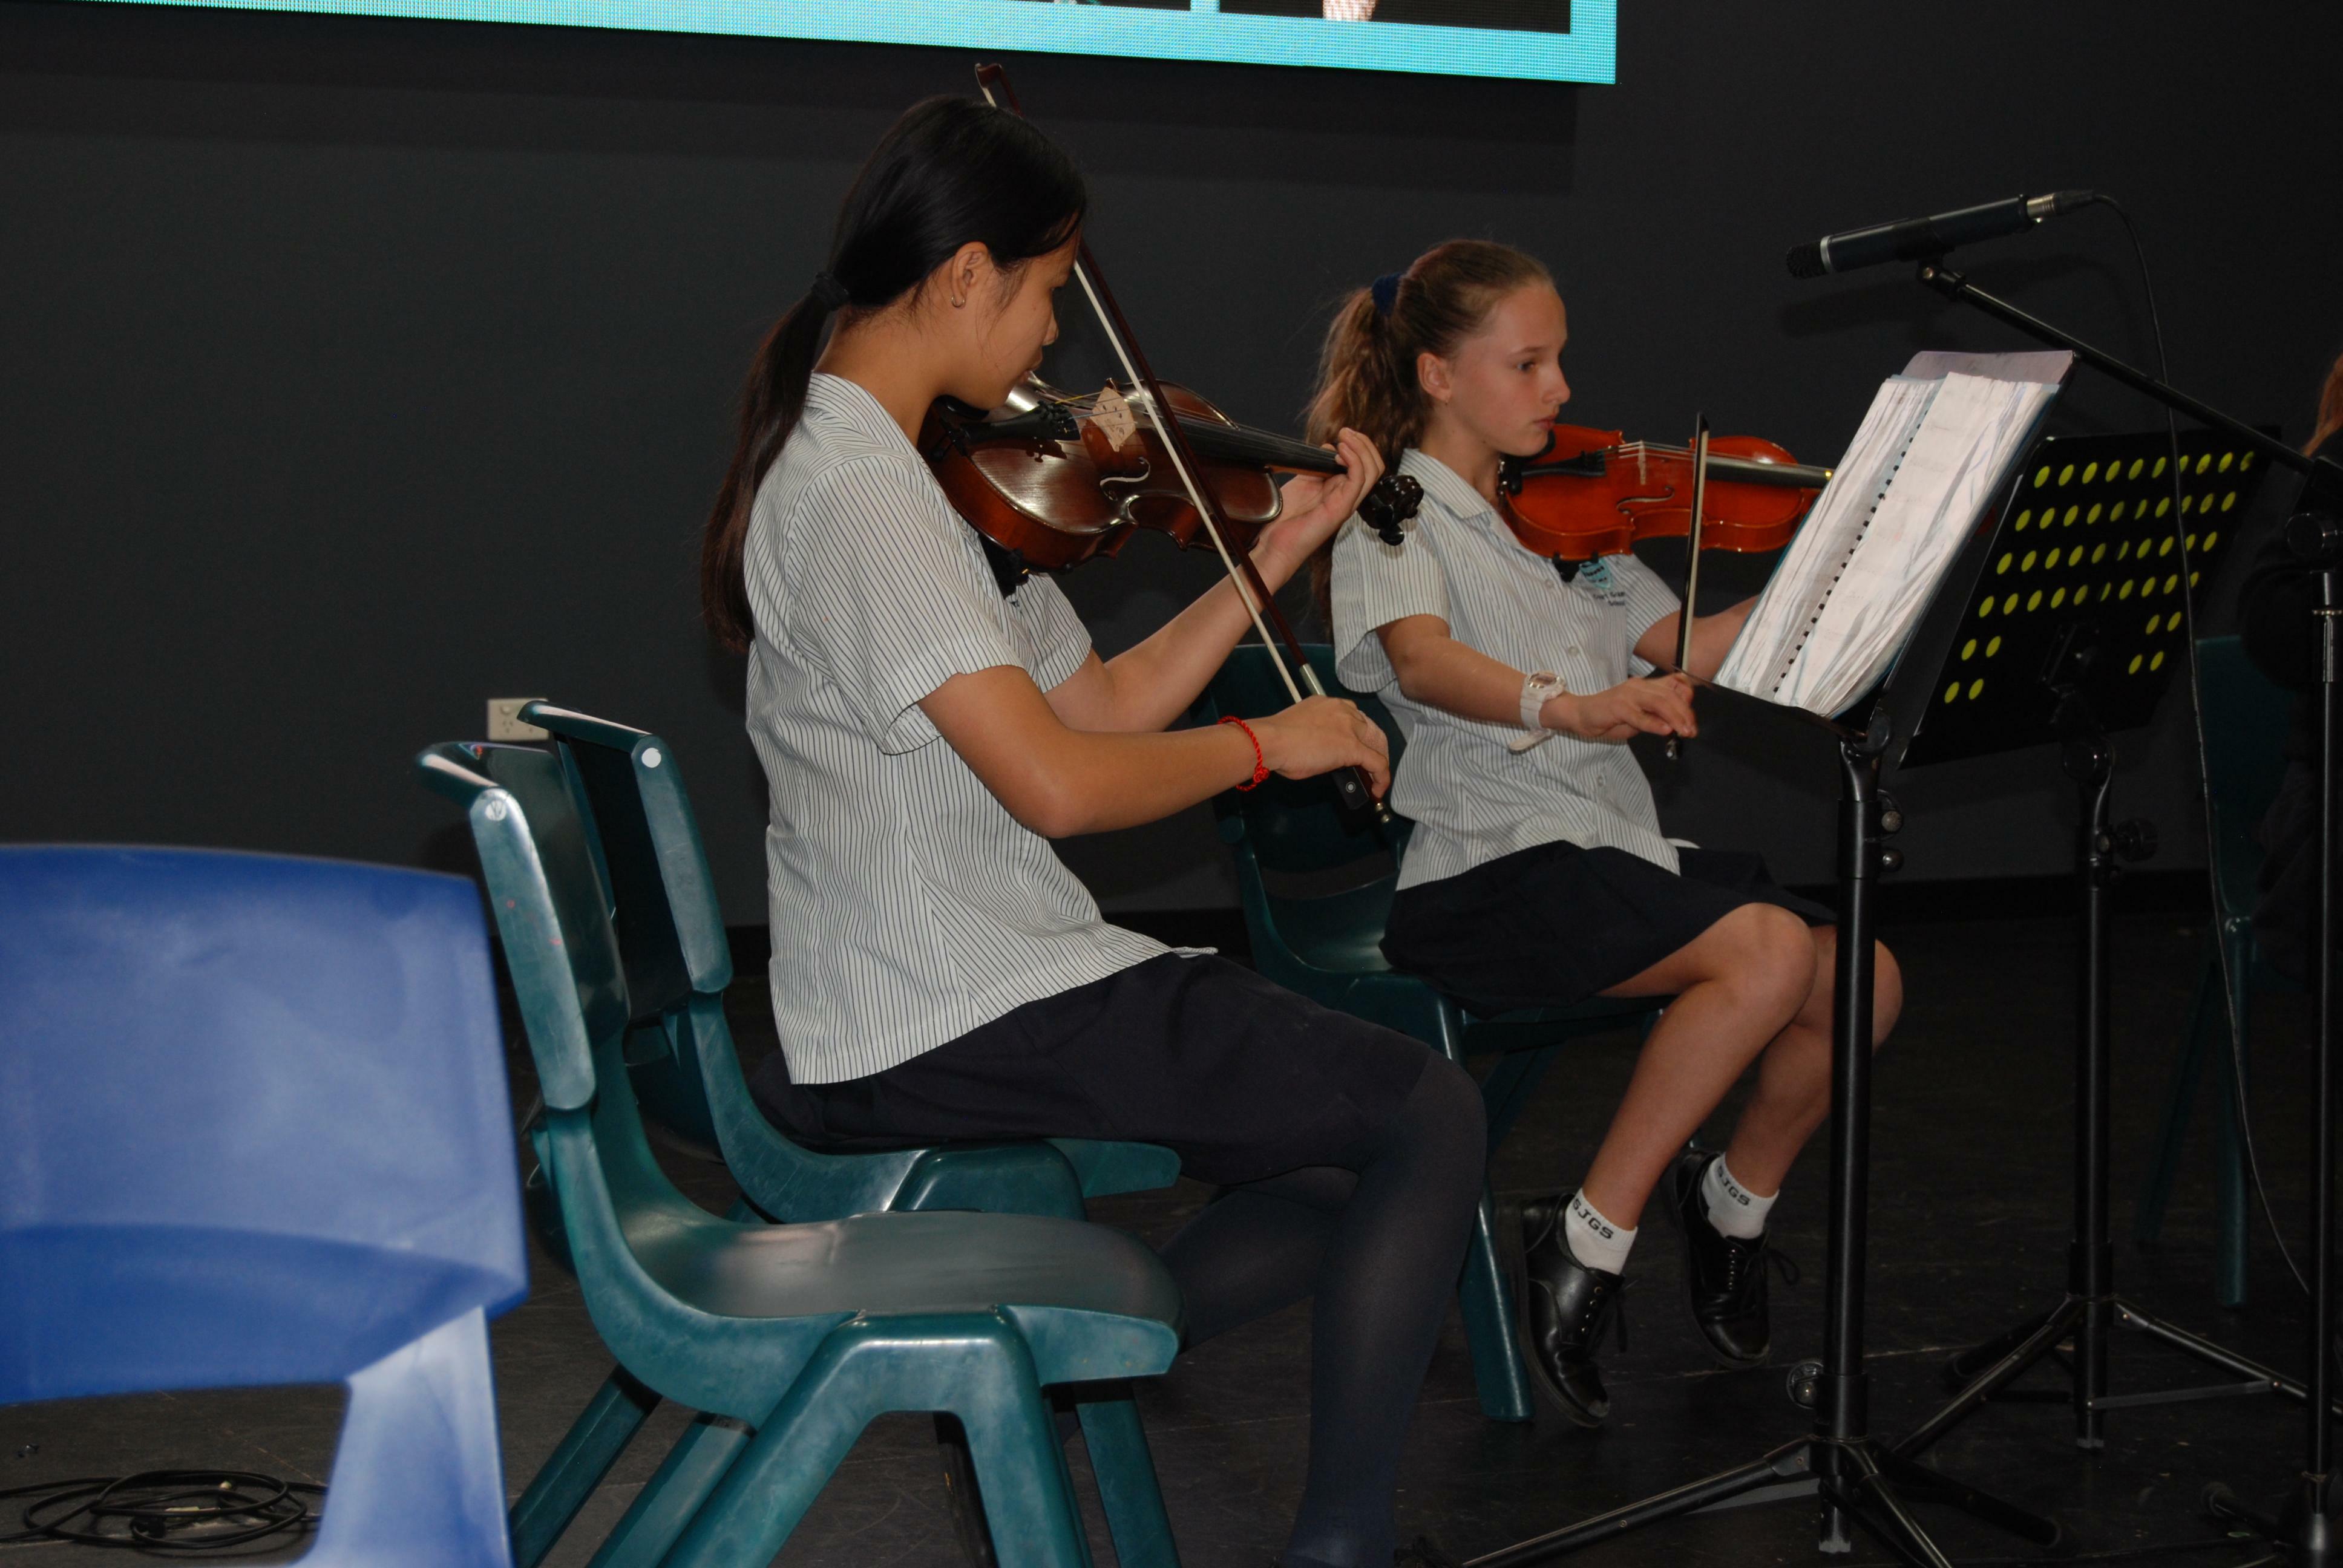 Musical performances assembly12